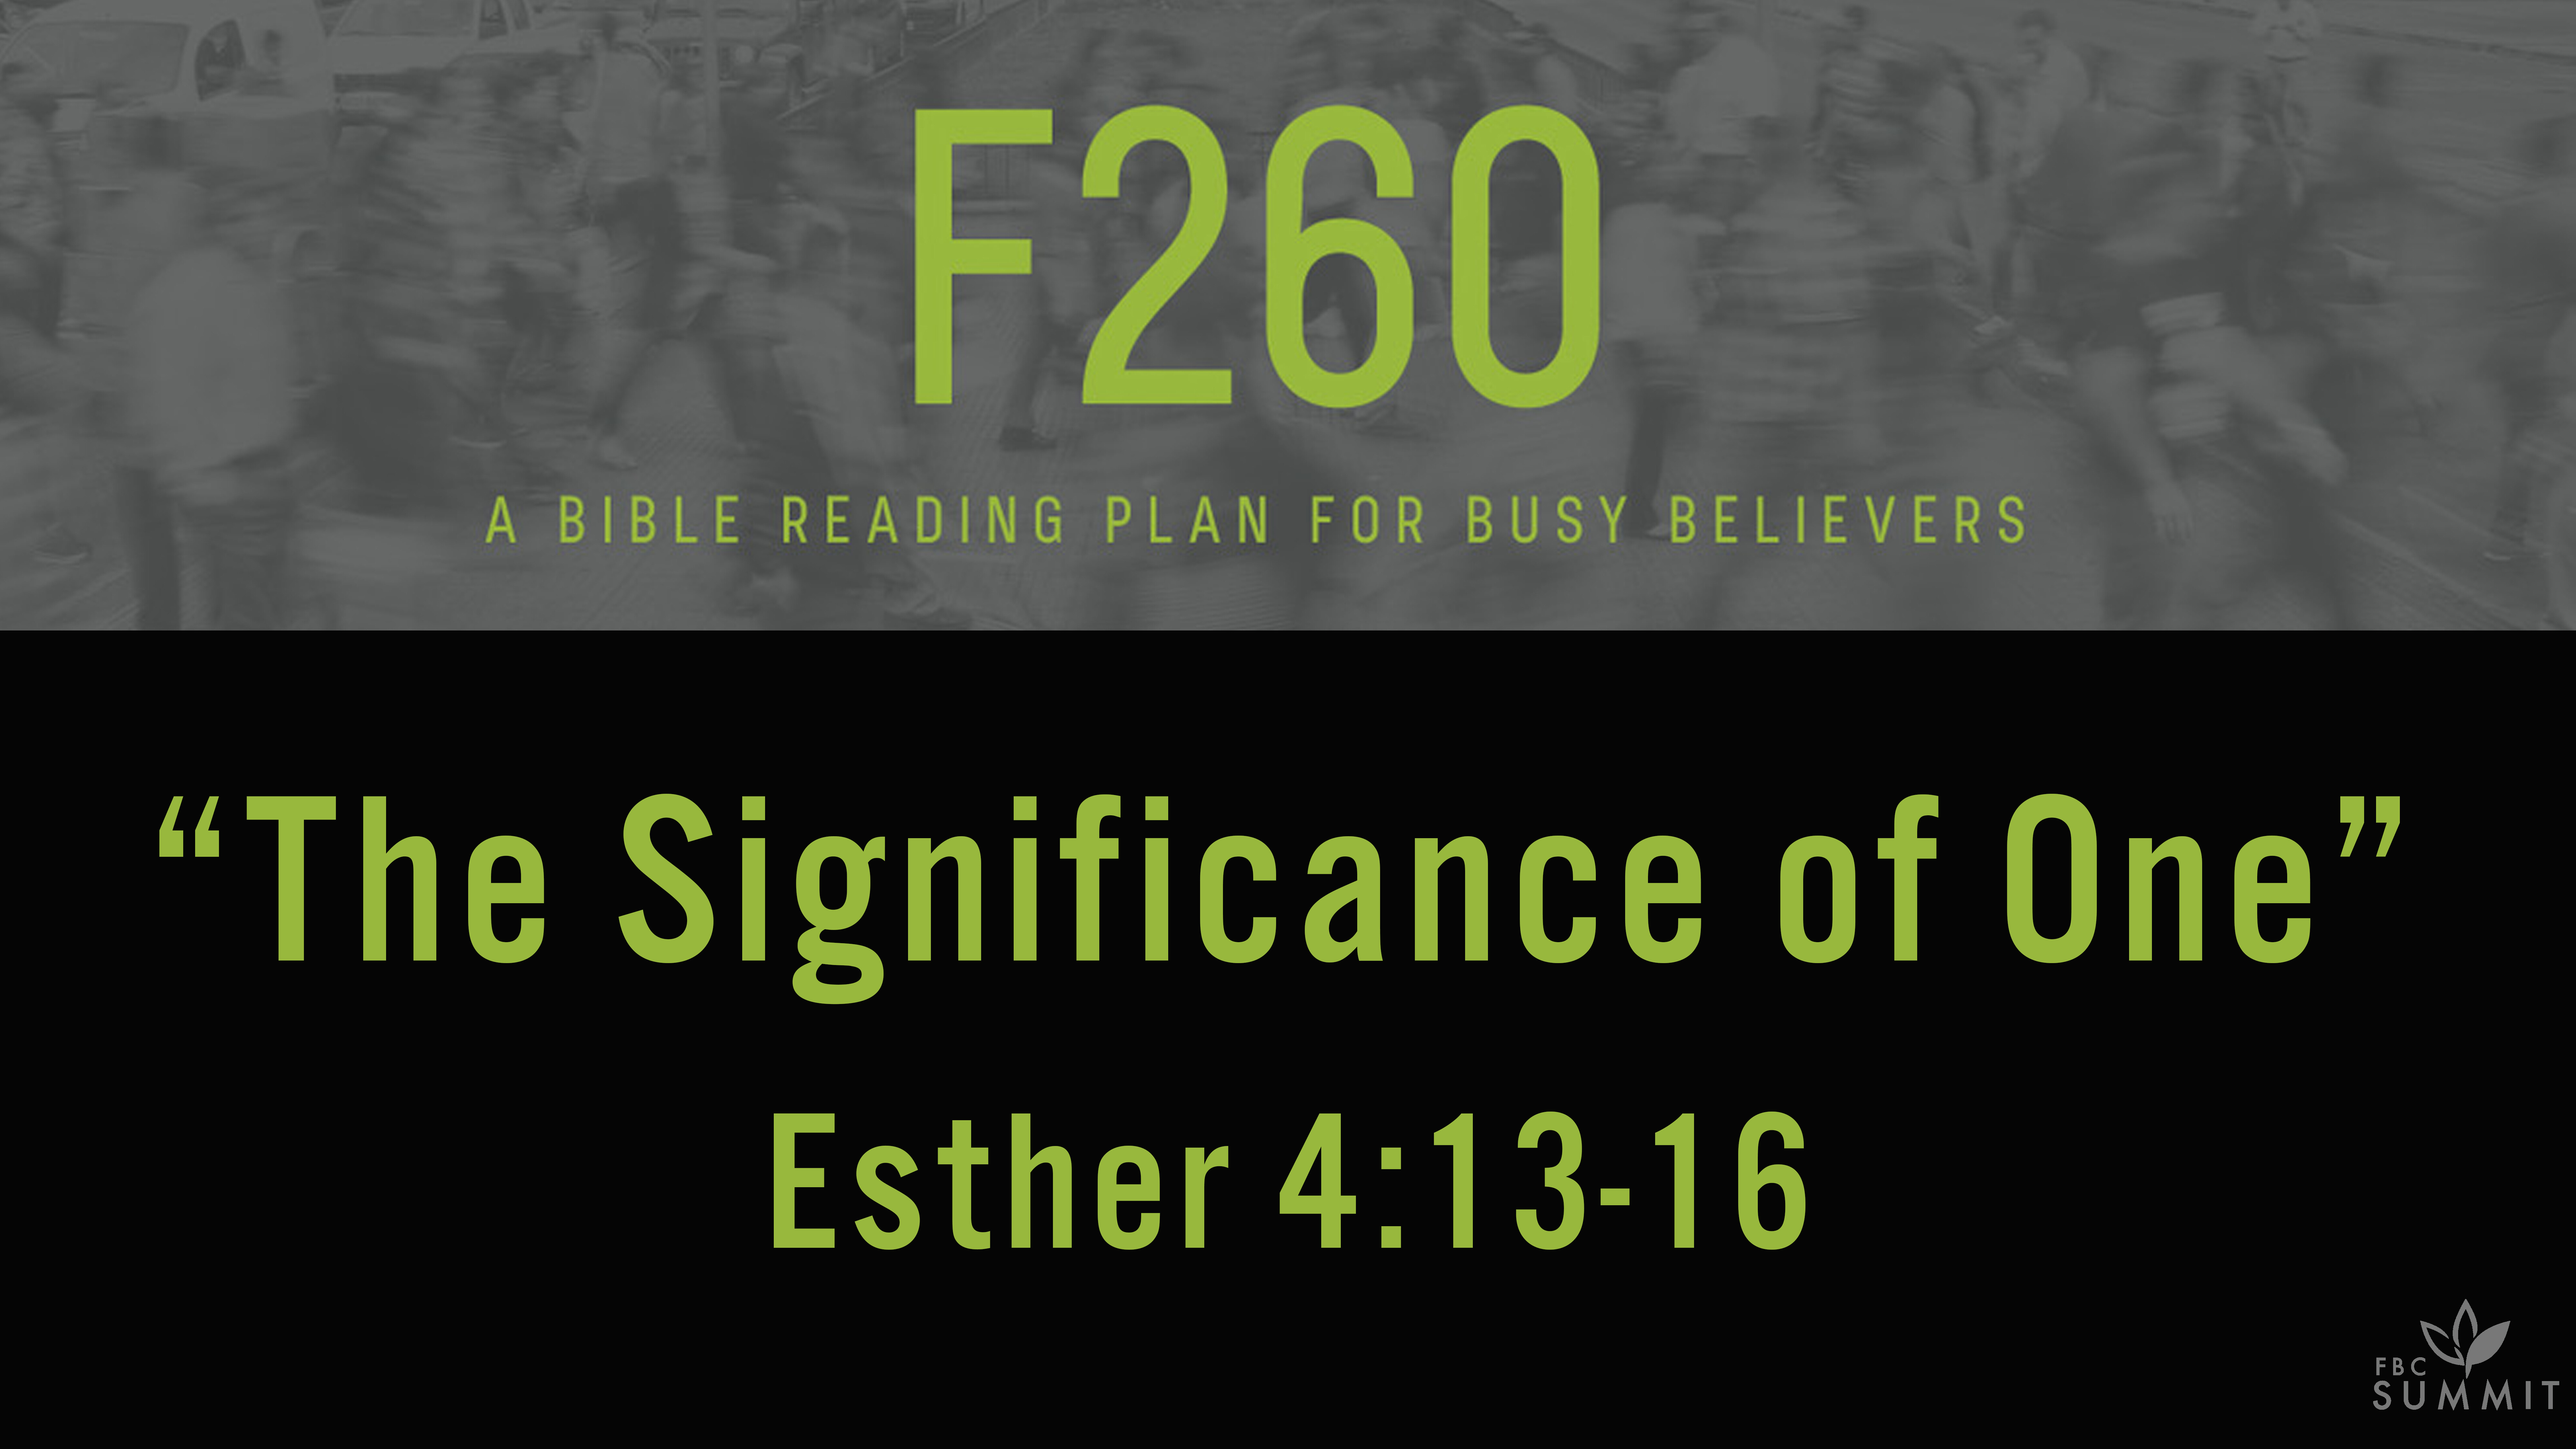 F260: "The Significance of One" Esther 4:13-16